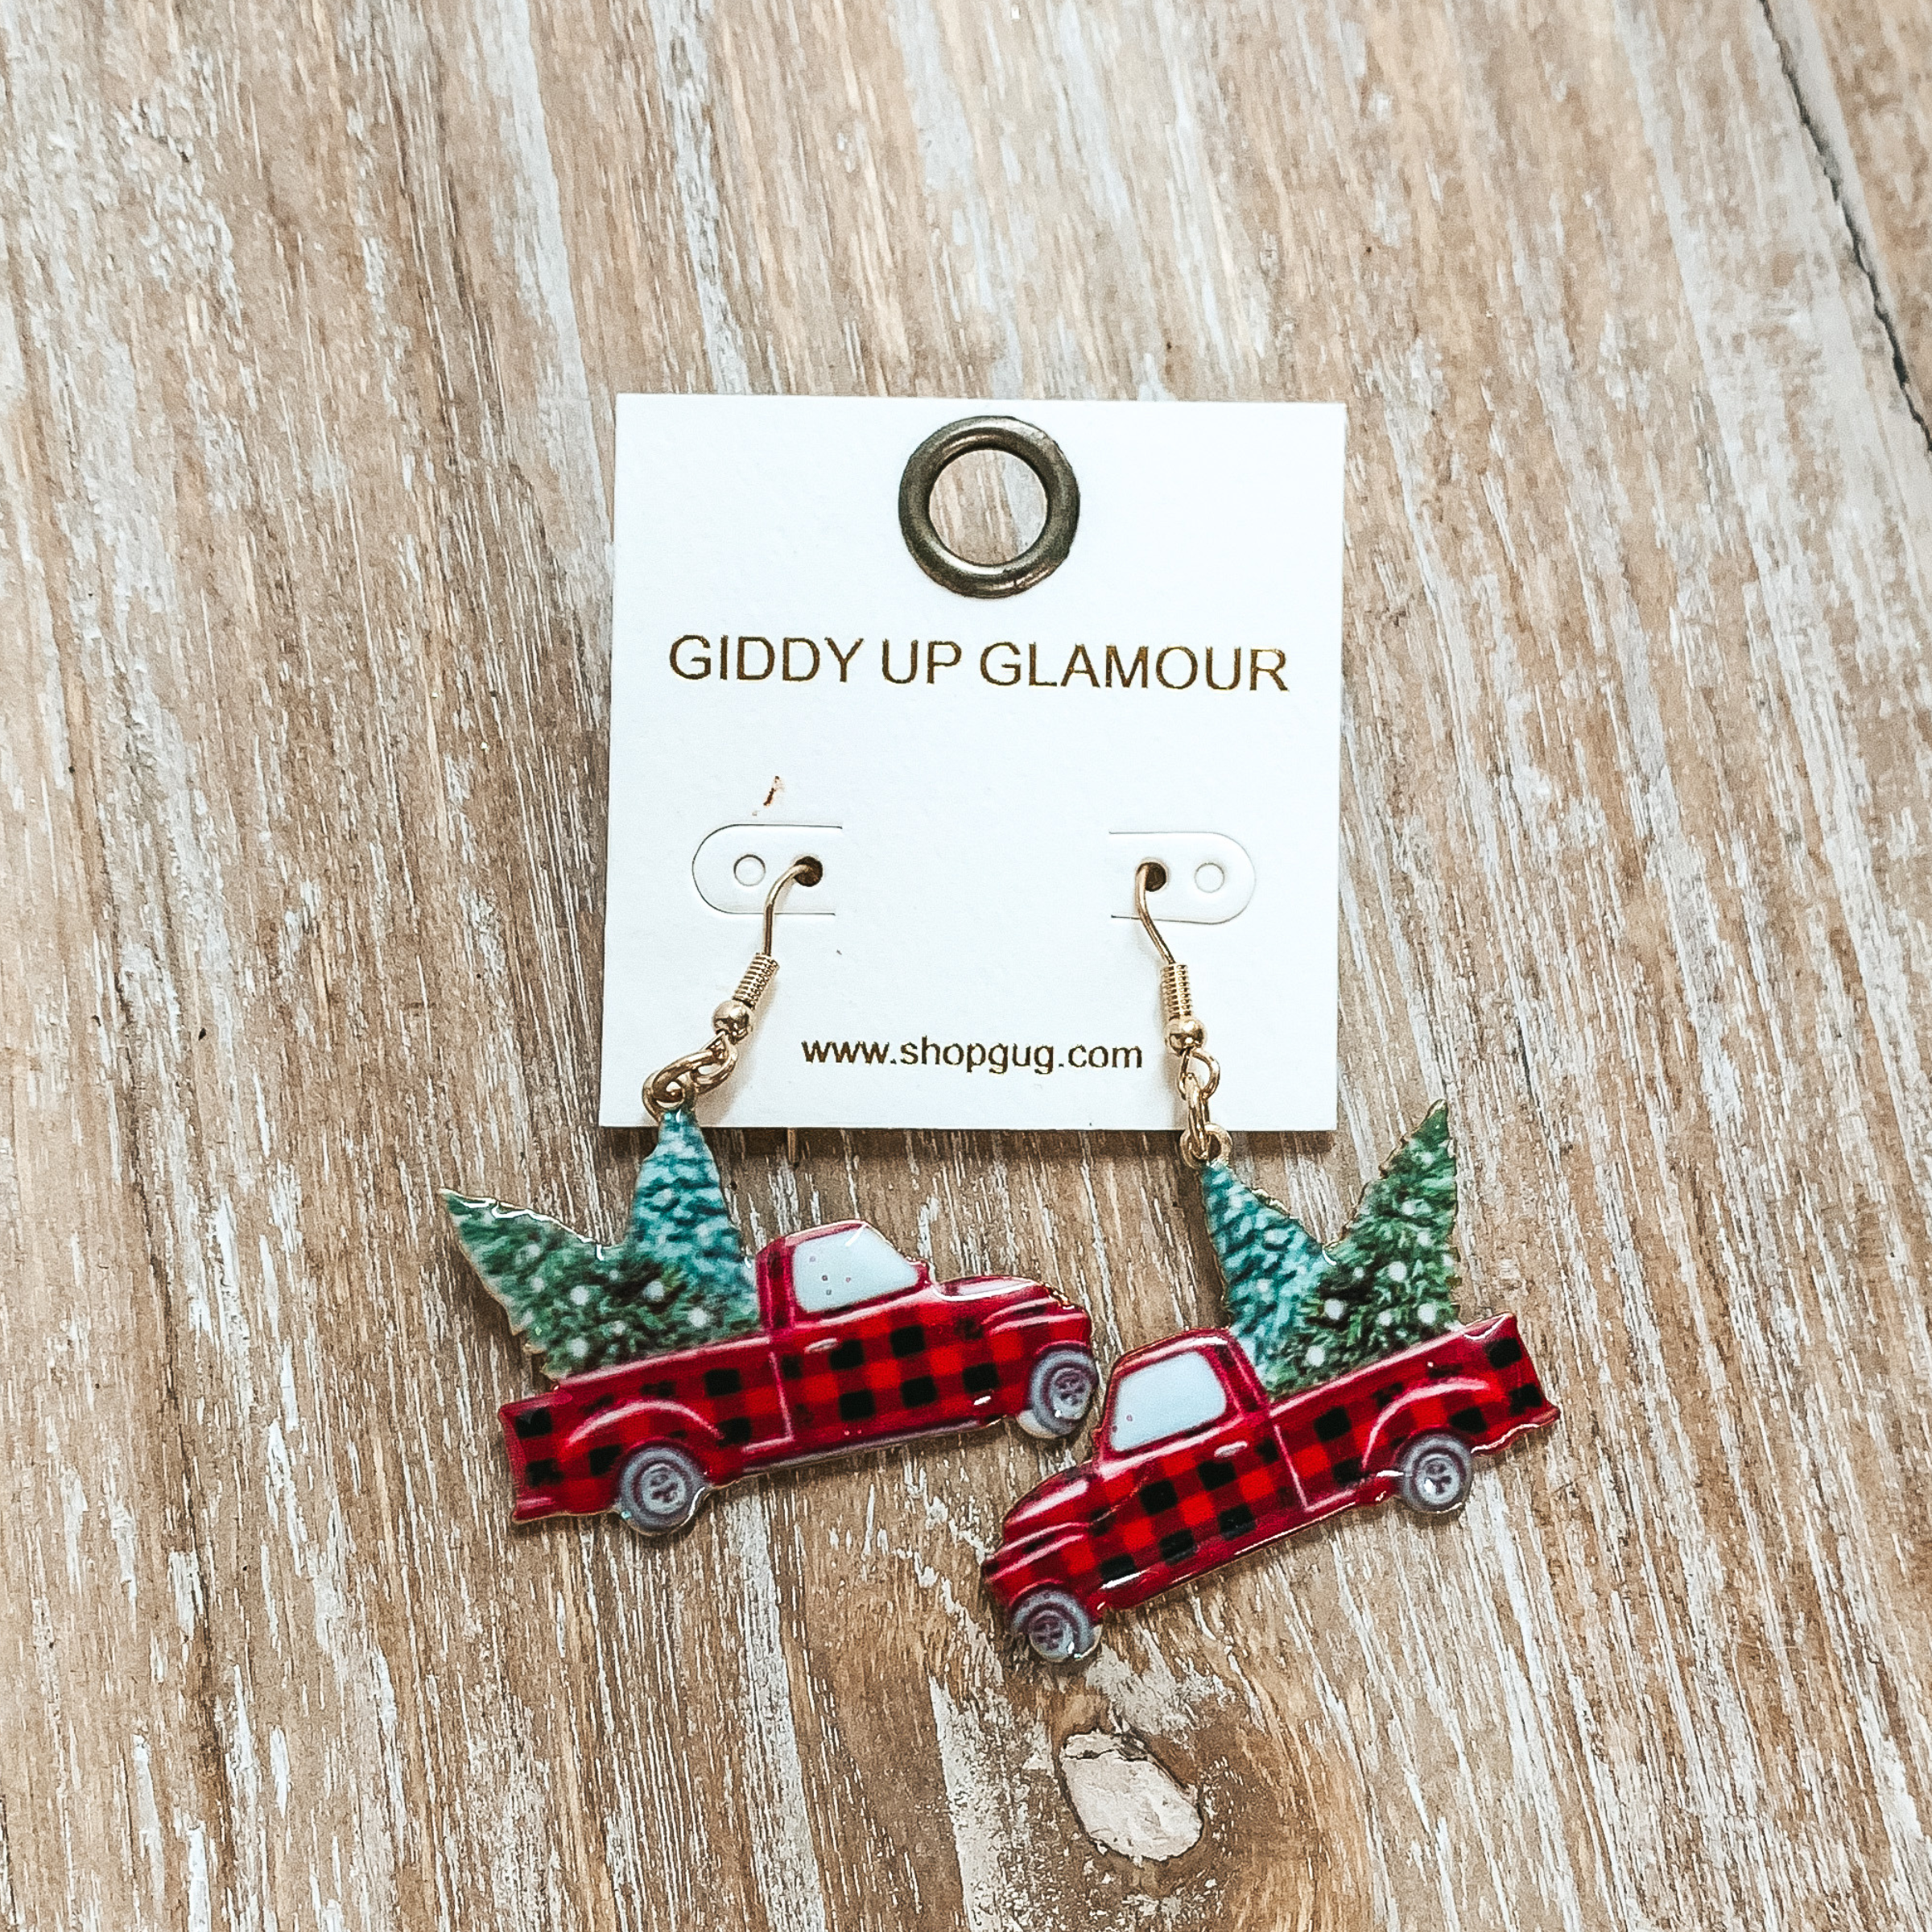 Gold Tone Fishhook Earrings with Buffalo Plaid Truck and Christmas Tree Pendant - Giddy Up Glamour Boutique